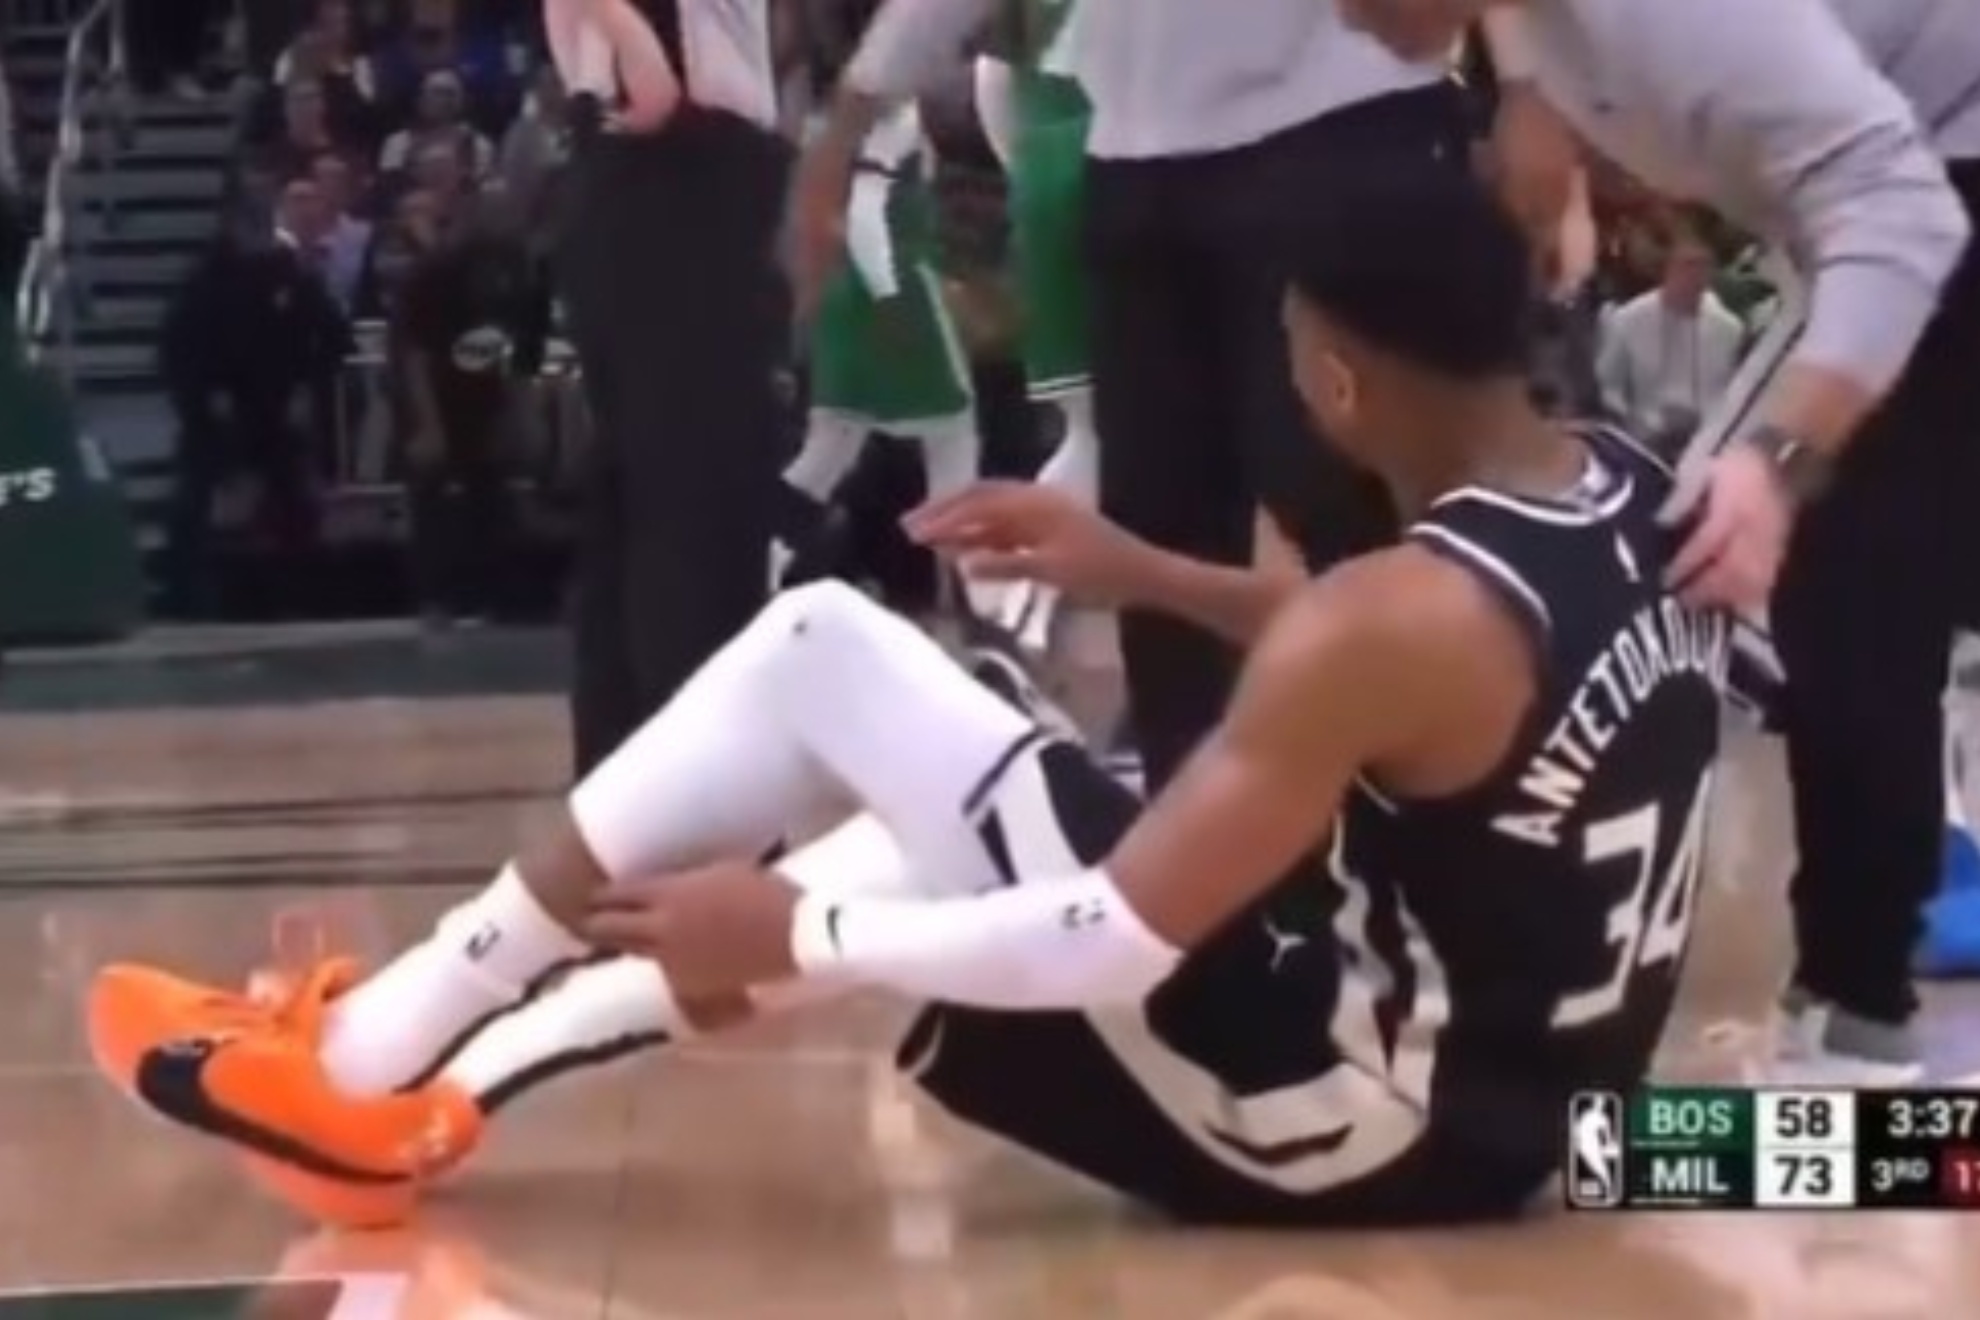 Bucks star Giannis Antetokounmpo exited the game against the Celtics with an apparent leg injury